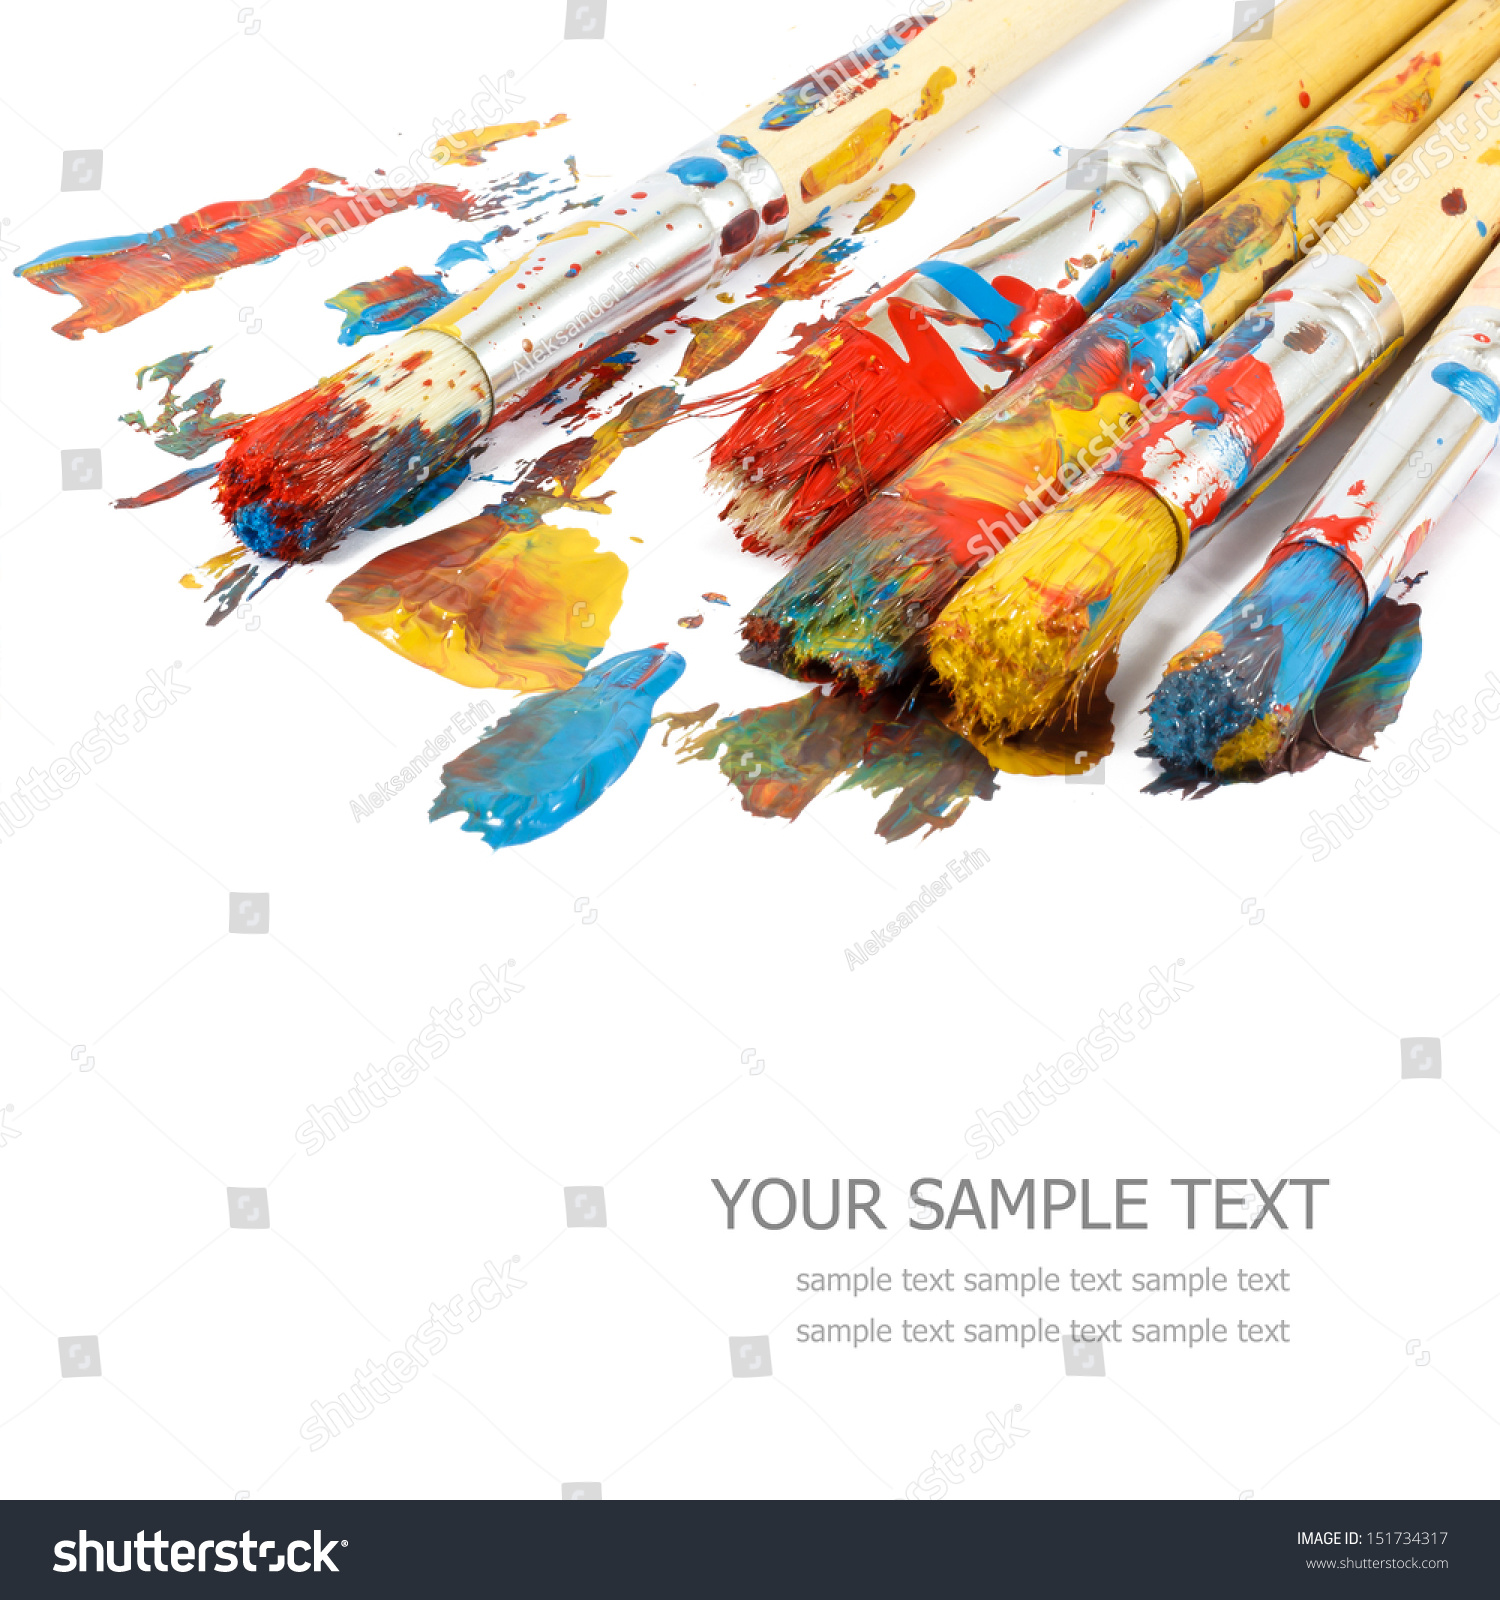 Colorful paints and artist brushes #151734317